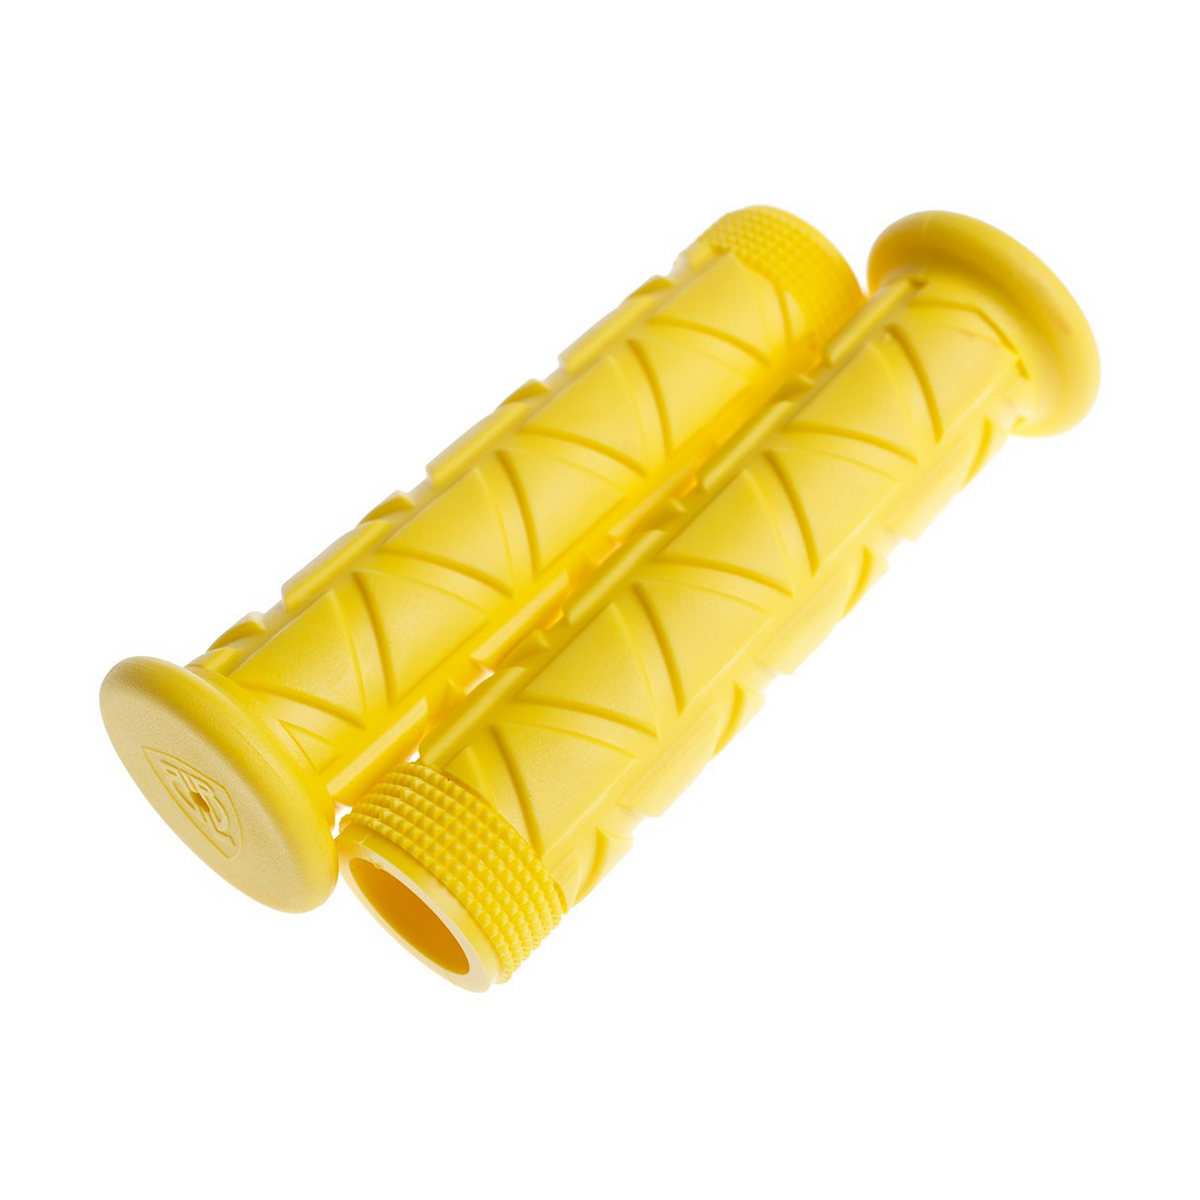 Pair get shorty grips yellow